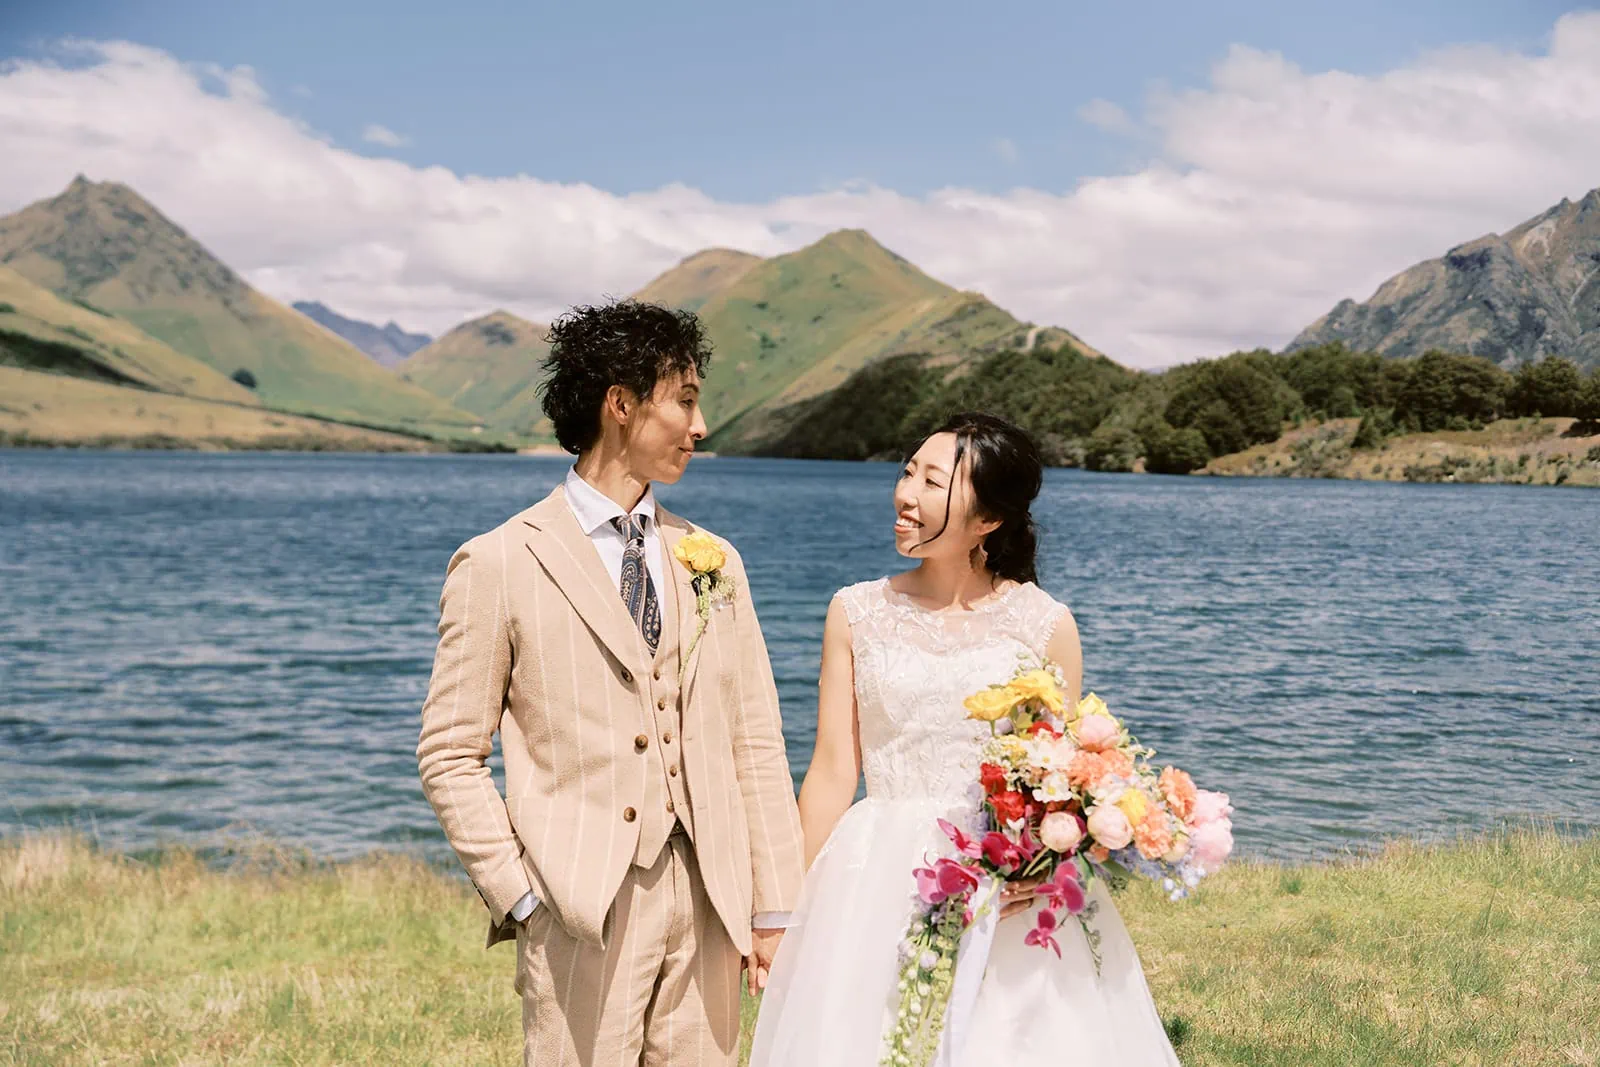 Queenstown Elopement Heli Wedding Photographer クイーンズタウン結婚式 | Queenstown Heli Pre-Wedding Photoshoot with a bride and groom standing in front of a lake.